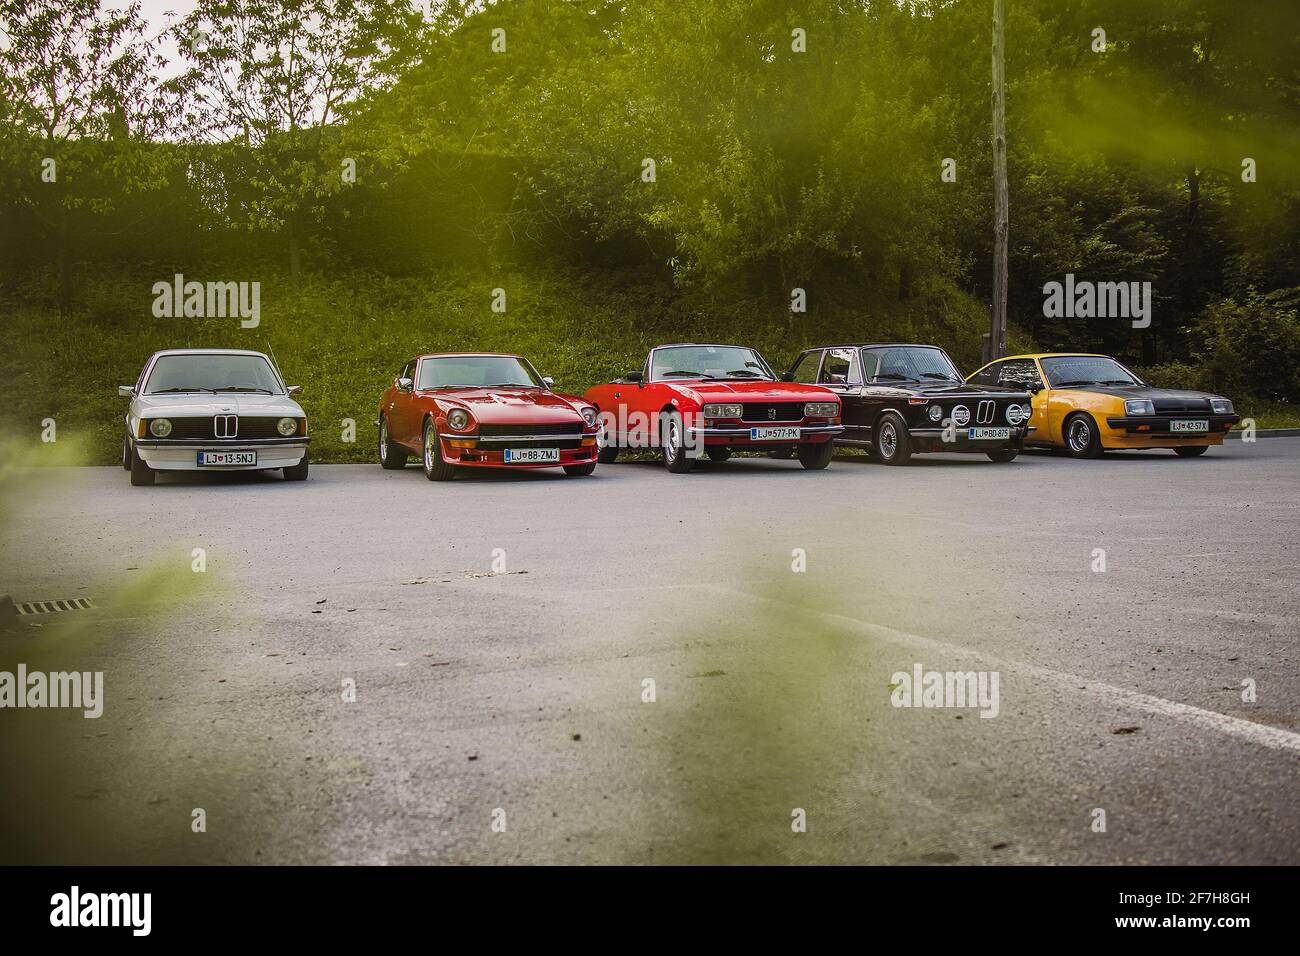 Polhov Gradec, Slovenia, 25.6.2019: A group of old vintage cars, including Datsun 240Z, Opel Manta B, Peugeot 504 and Bmw E21 325 and 2002 tii, waitin Stock Photo